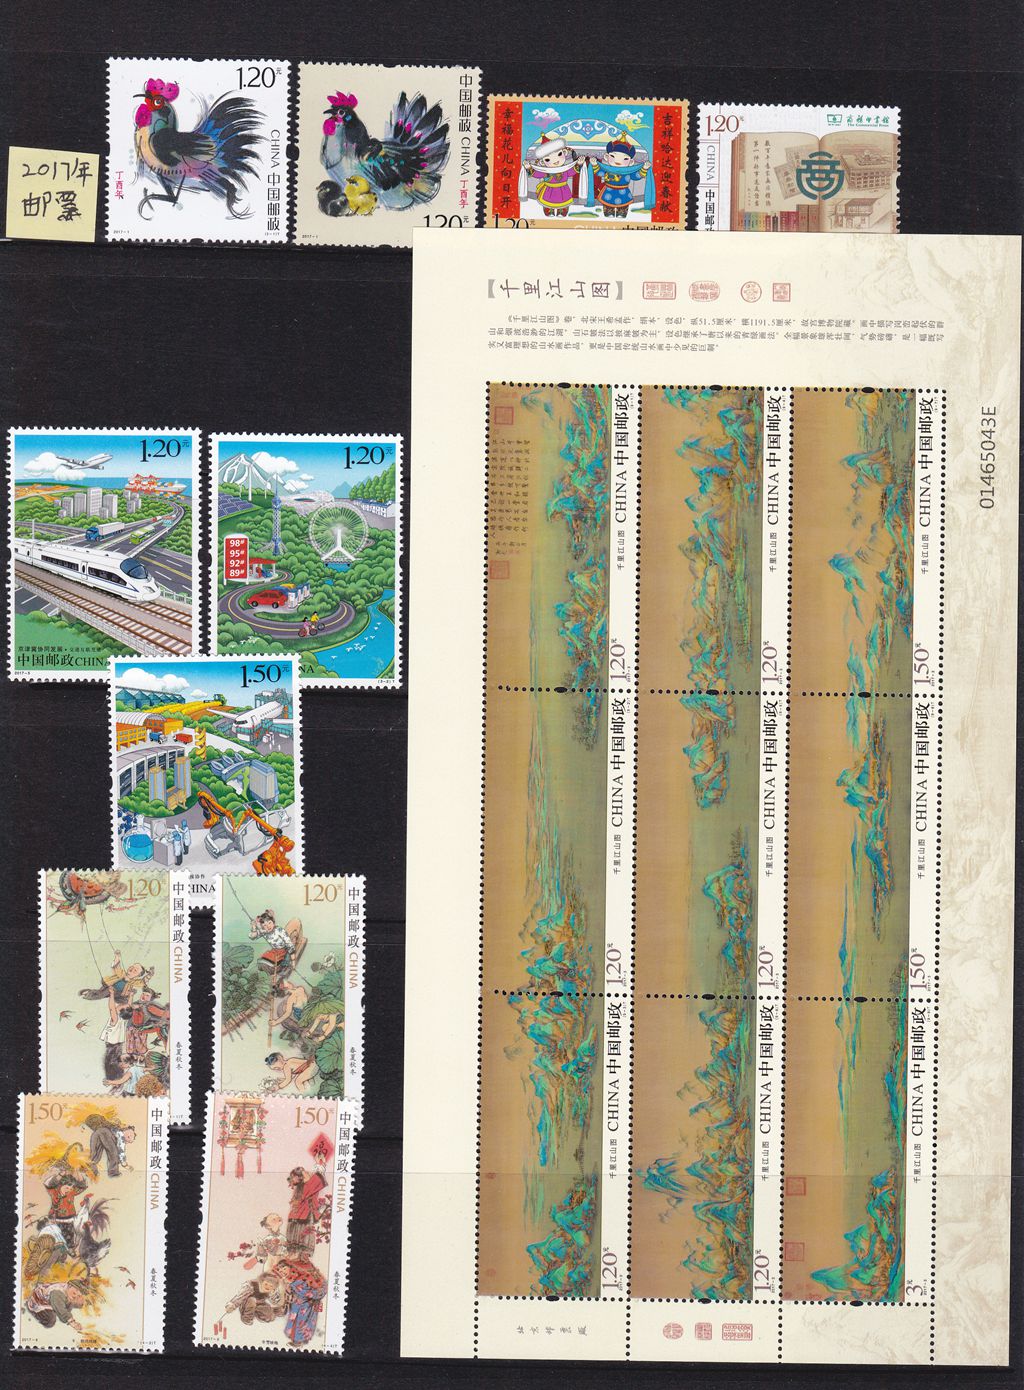 M2131, Complete 2017 China Stamp, SS and Booklet, With Official Album